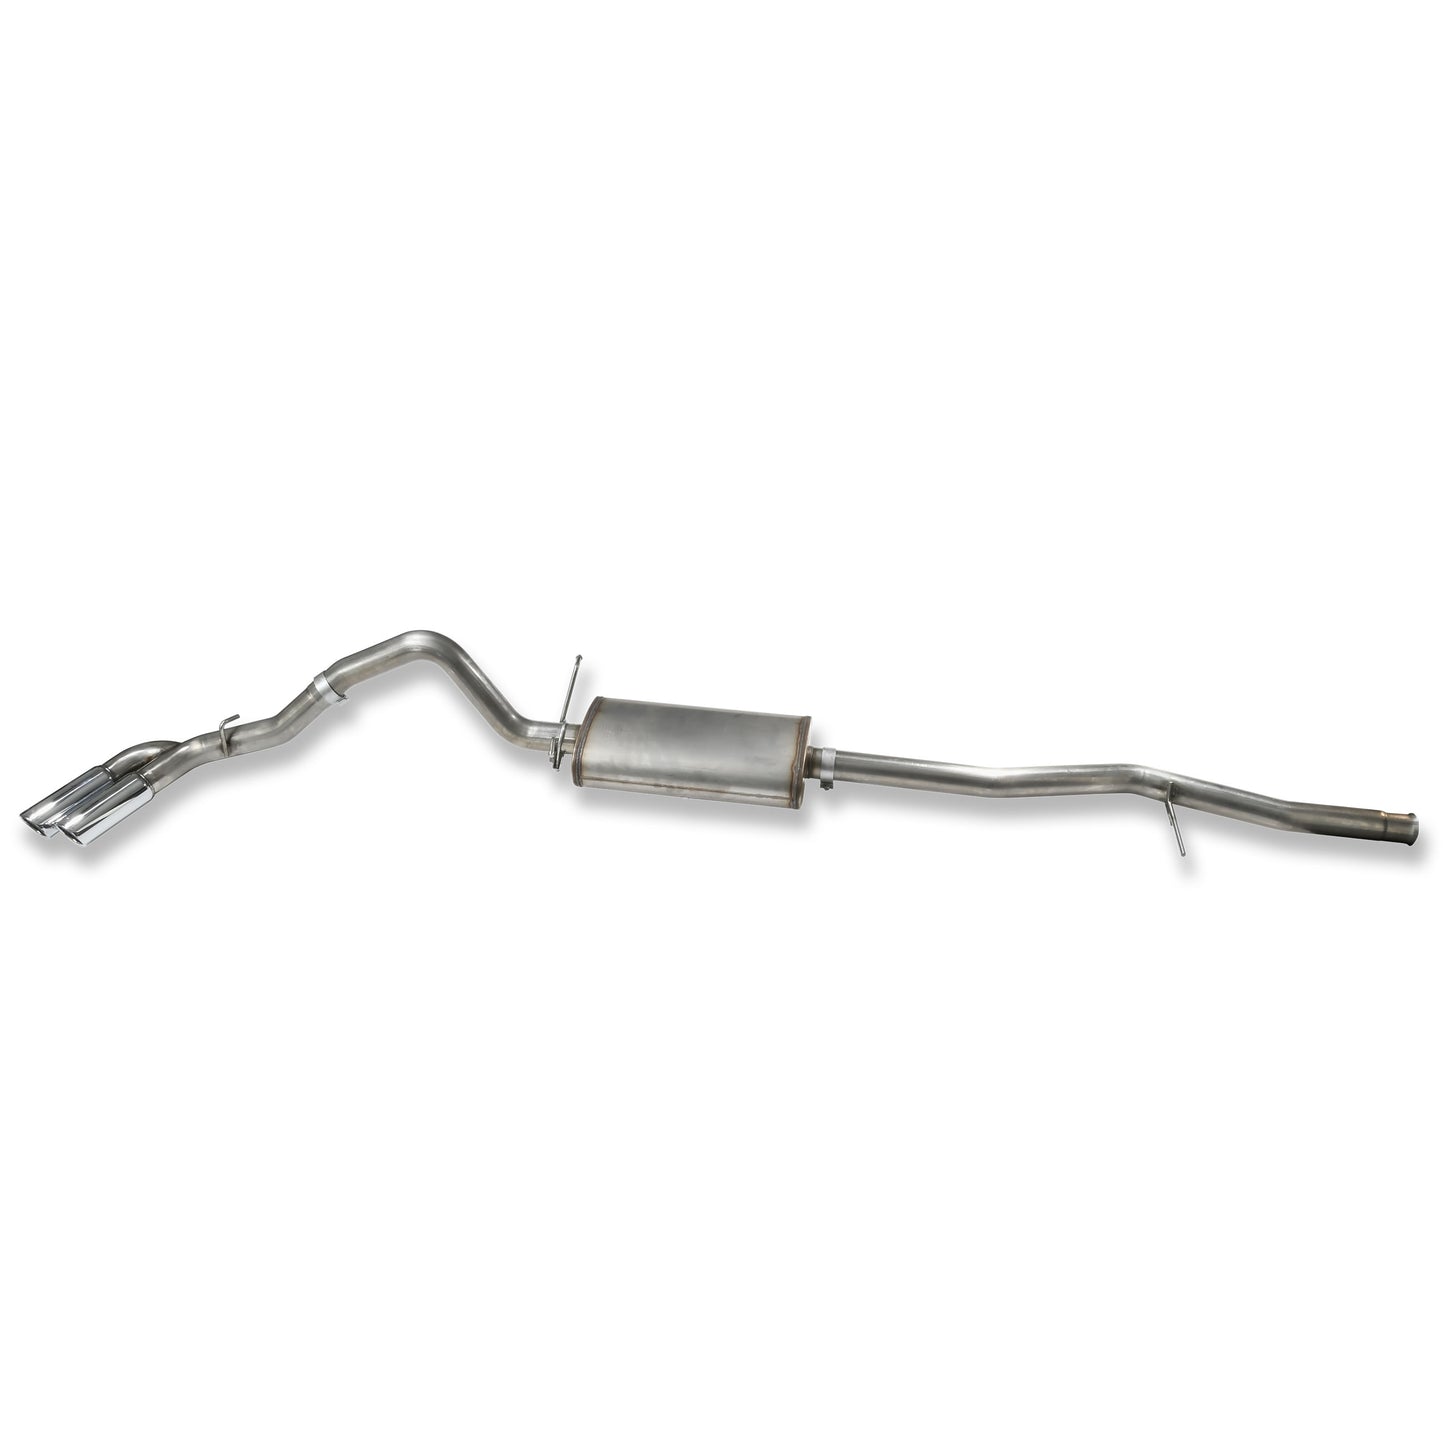 JBA Performance Exhaust 30-3054 3"  304 Stainless Steel Cat Back Exhaust System 2004-19 Chevy Silverado Trucks 4.8-5.3L 2/4 WD Double Cab (EXT) and Crew Cab models only not standard cab Dual Side Swept 304SS Tips